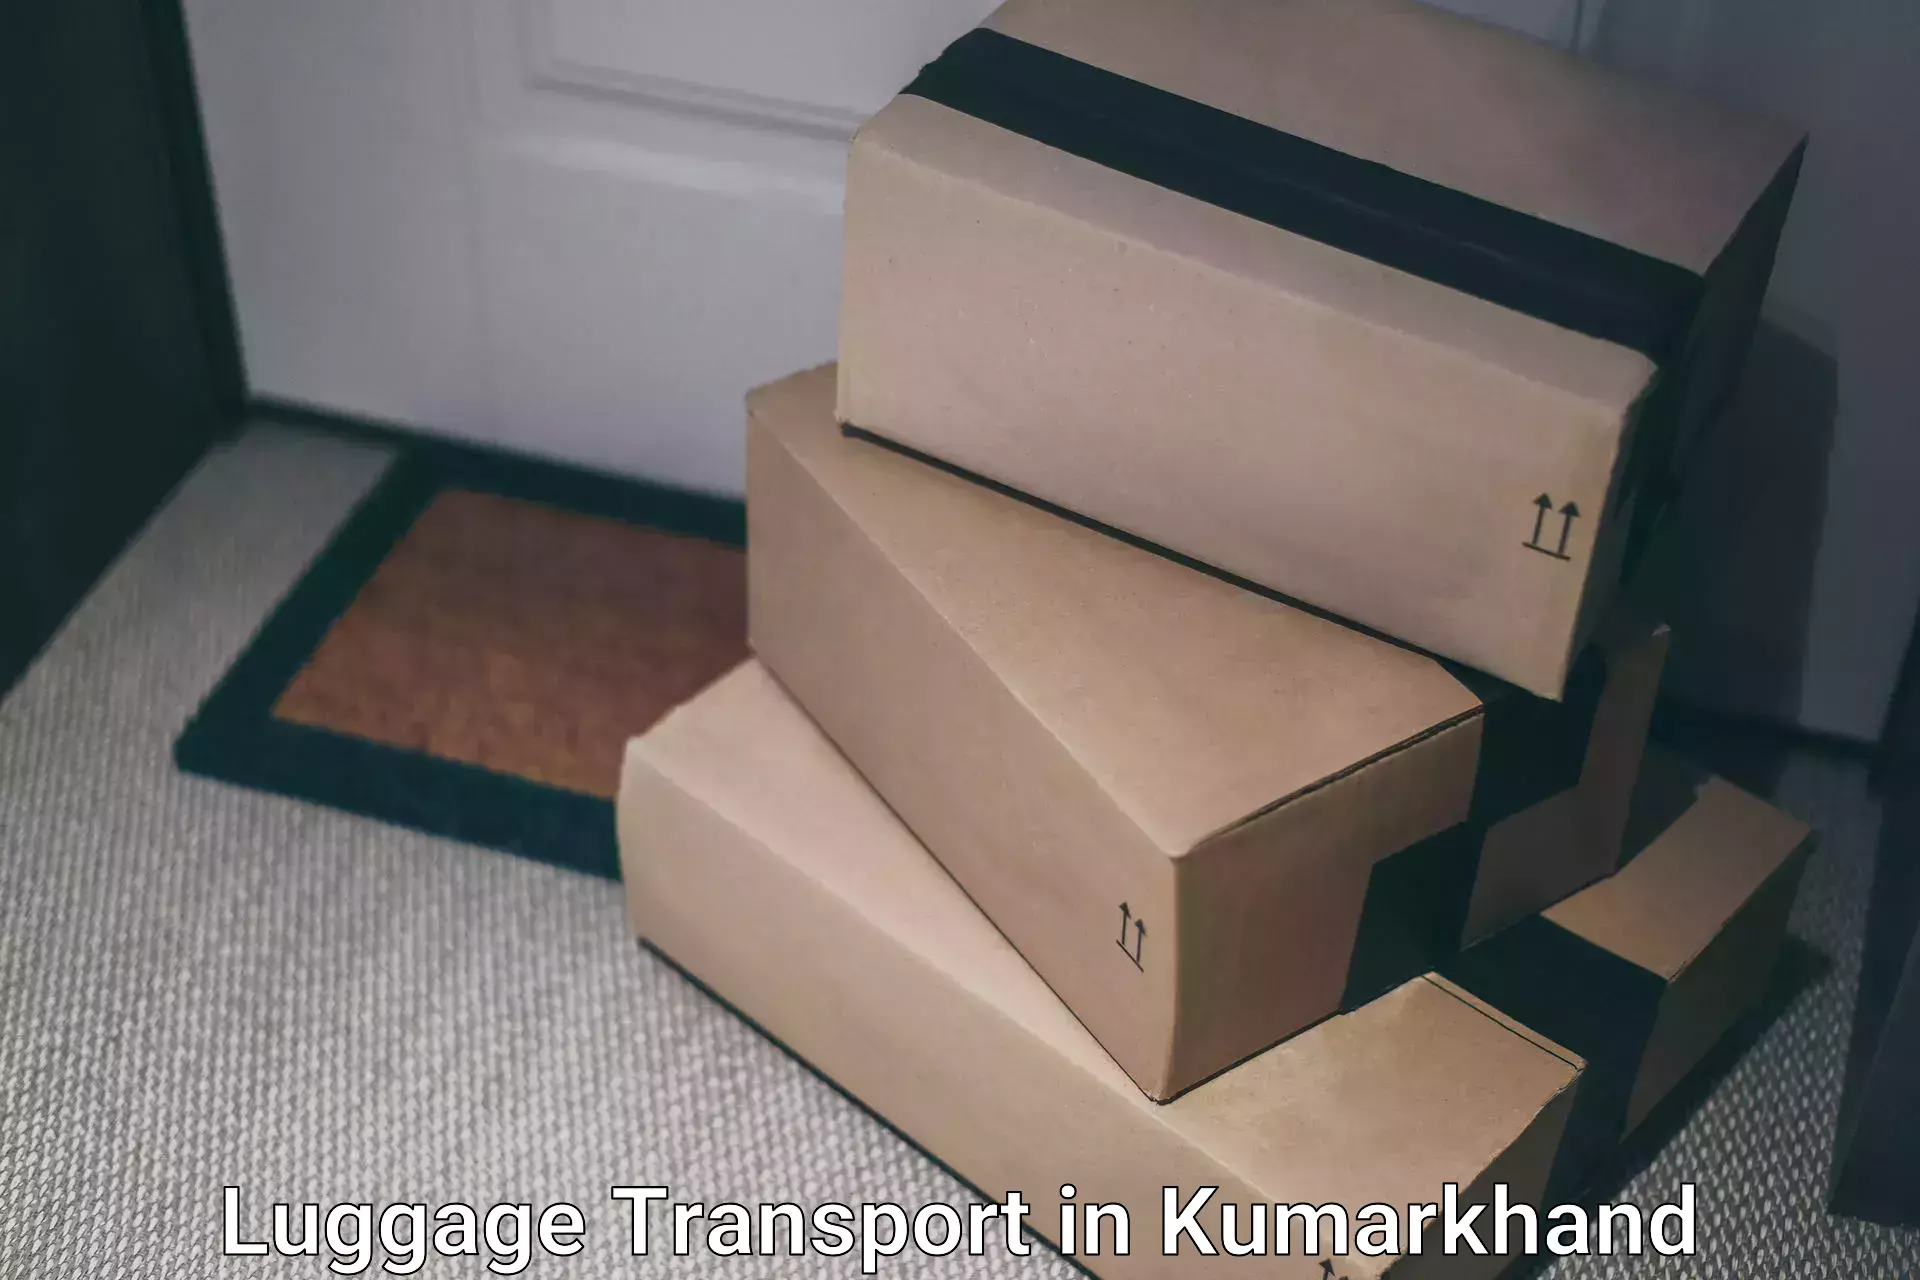 Luggage transport service in Kumarkhand